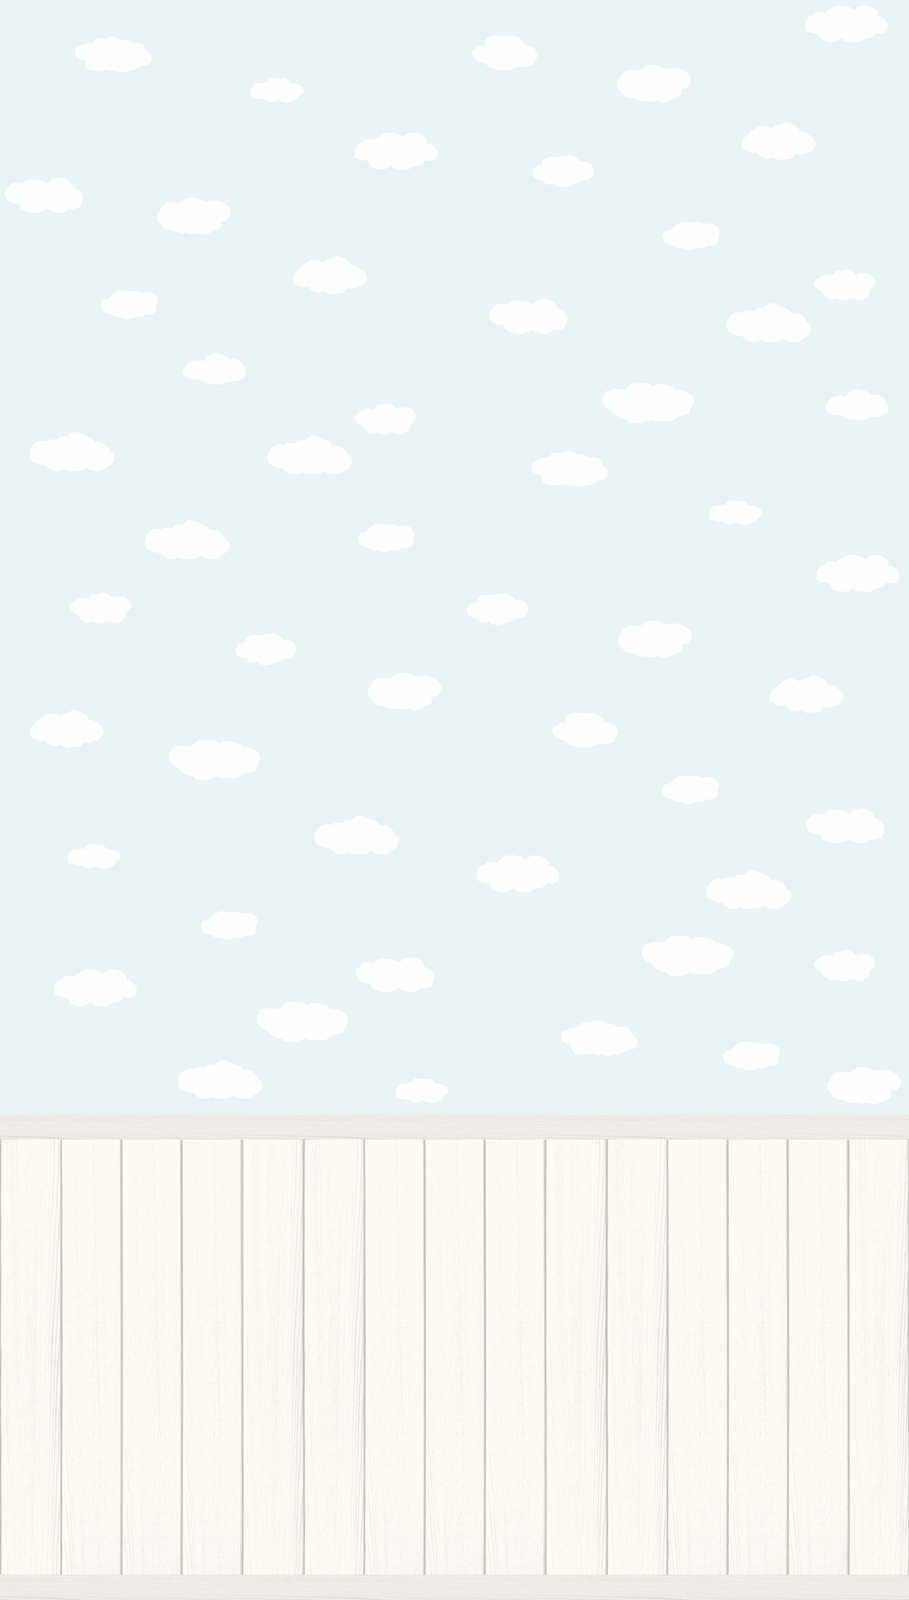             Non-woven motif wallpaper with wood-effect plinth border and cloud pattern - blue, white, grey
        